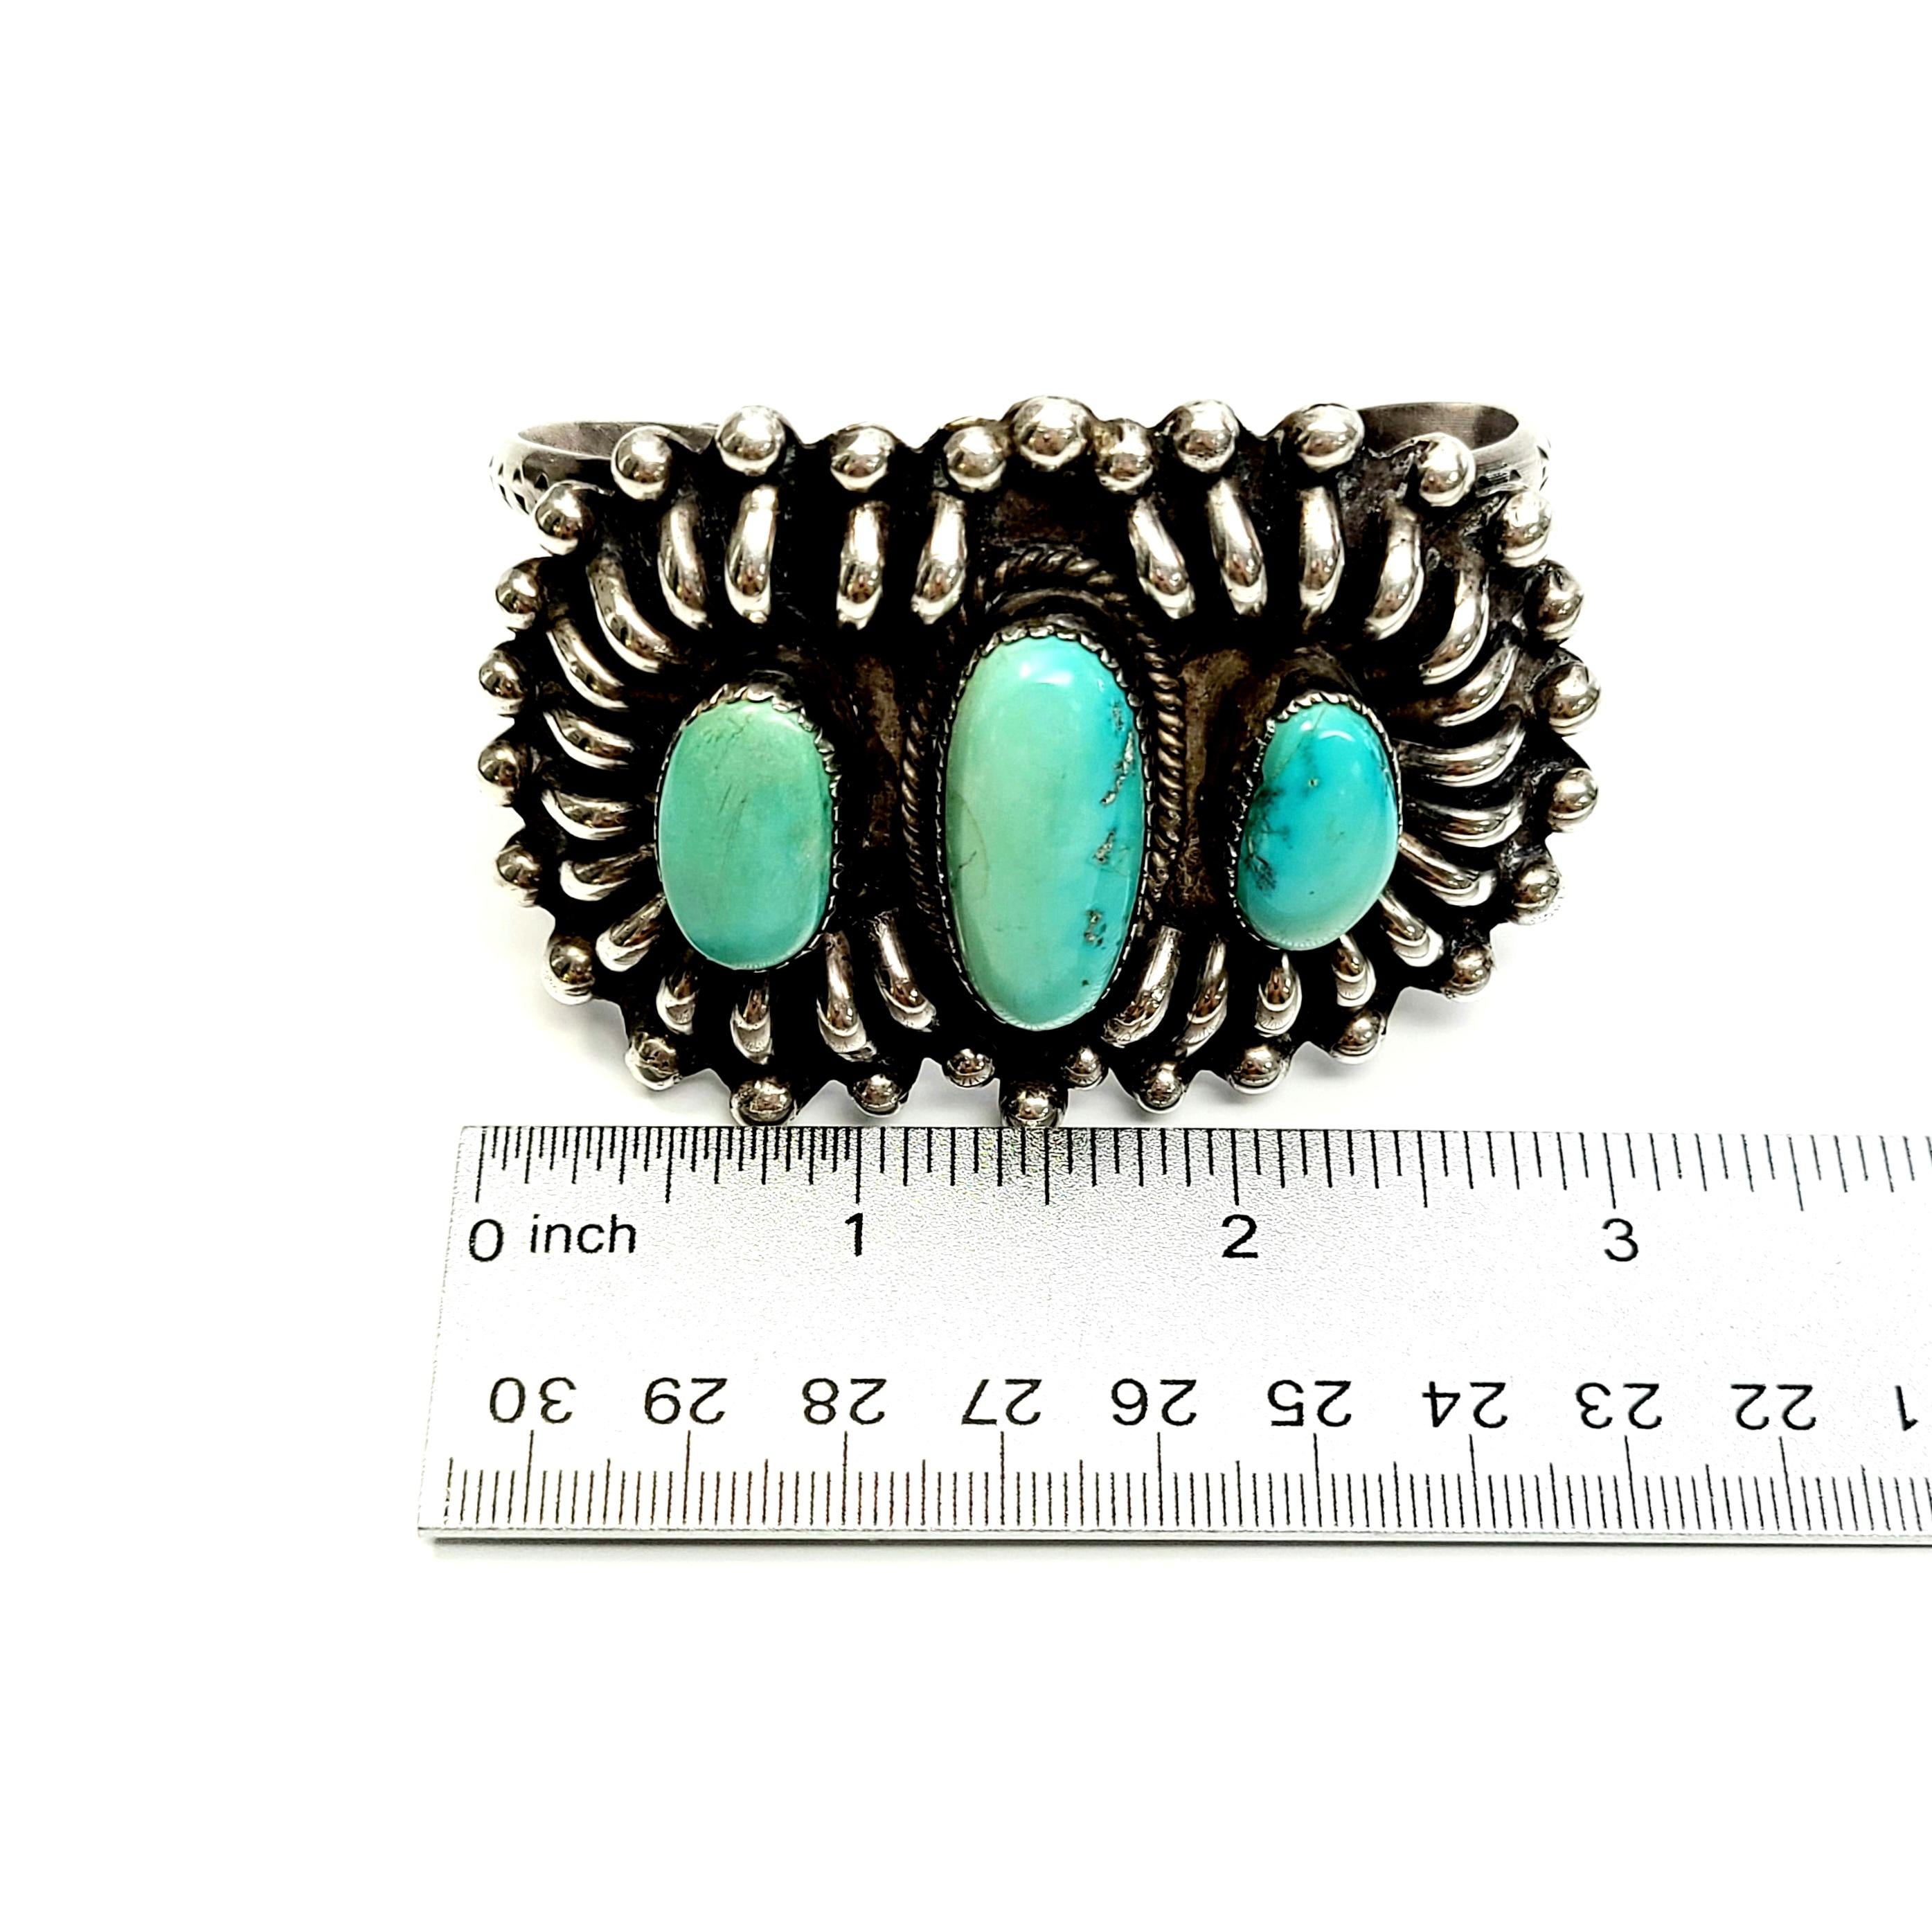 Native American Daisy M Tsosie Large Sterling Silver Turquoise Cuff Bracelet 8